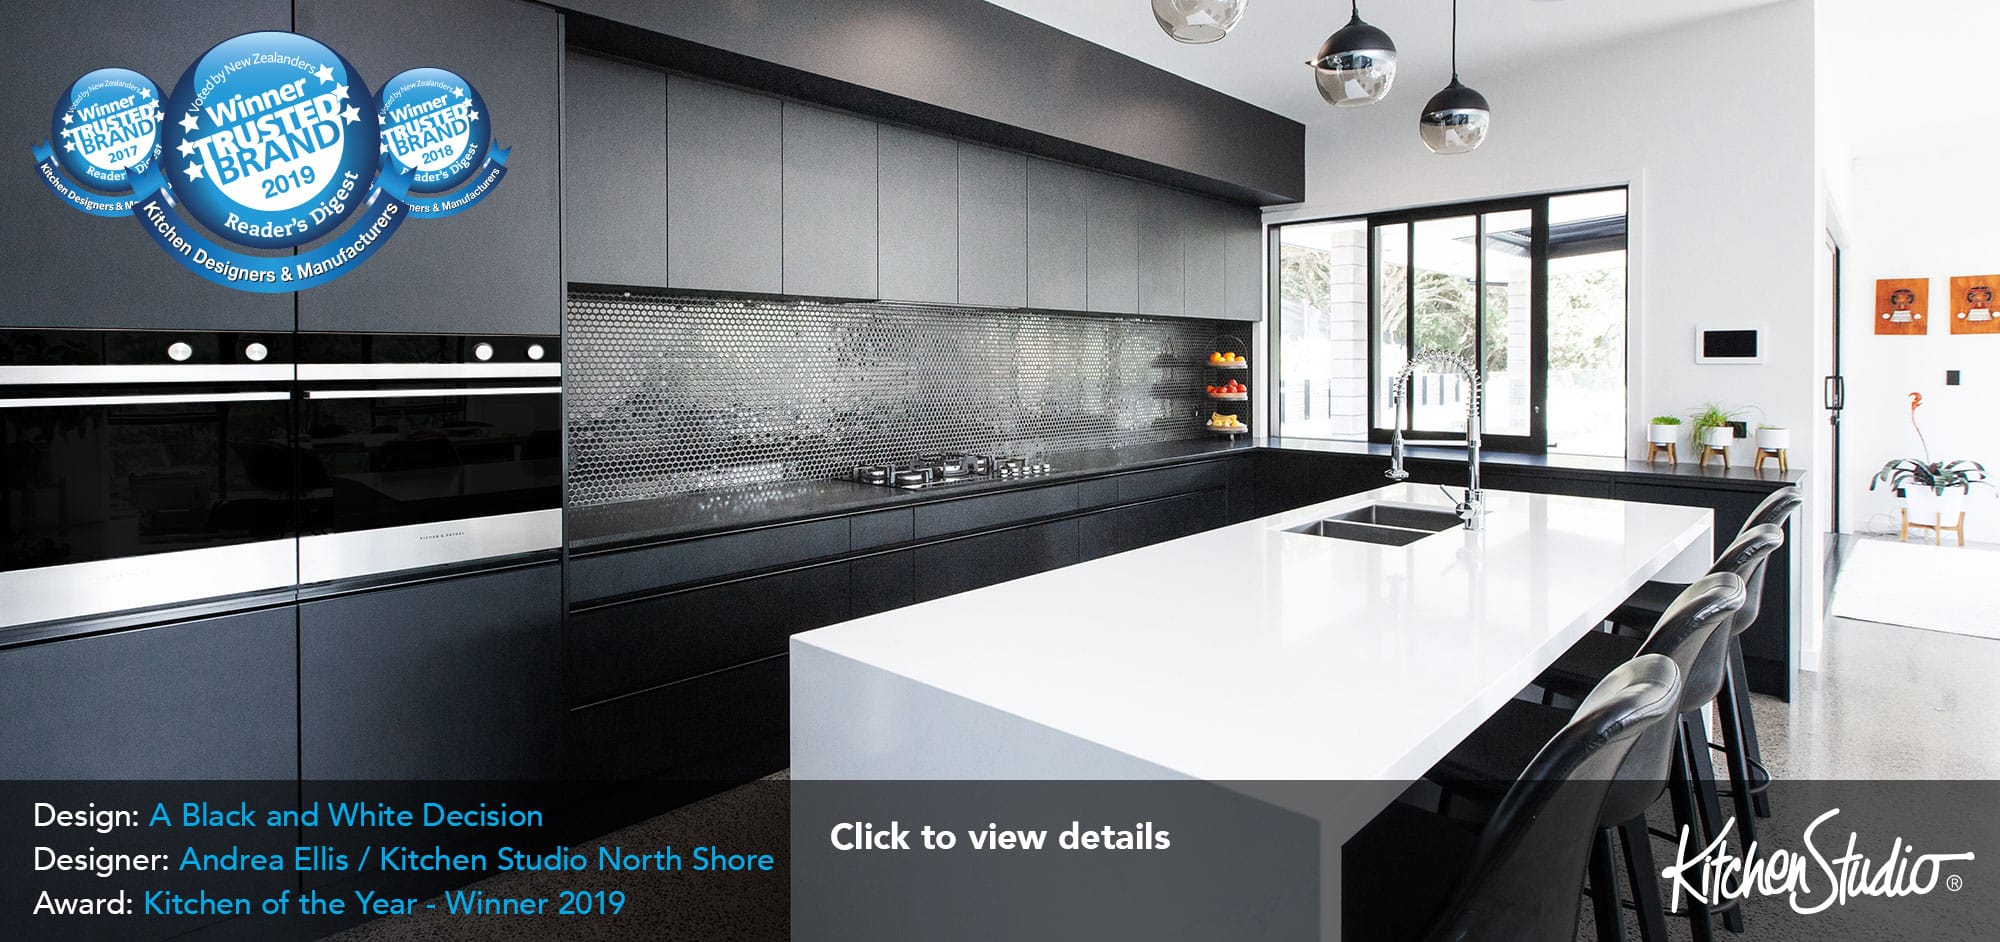 Kitchen Studio • The most trusted kitchen brand in New Zealand